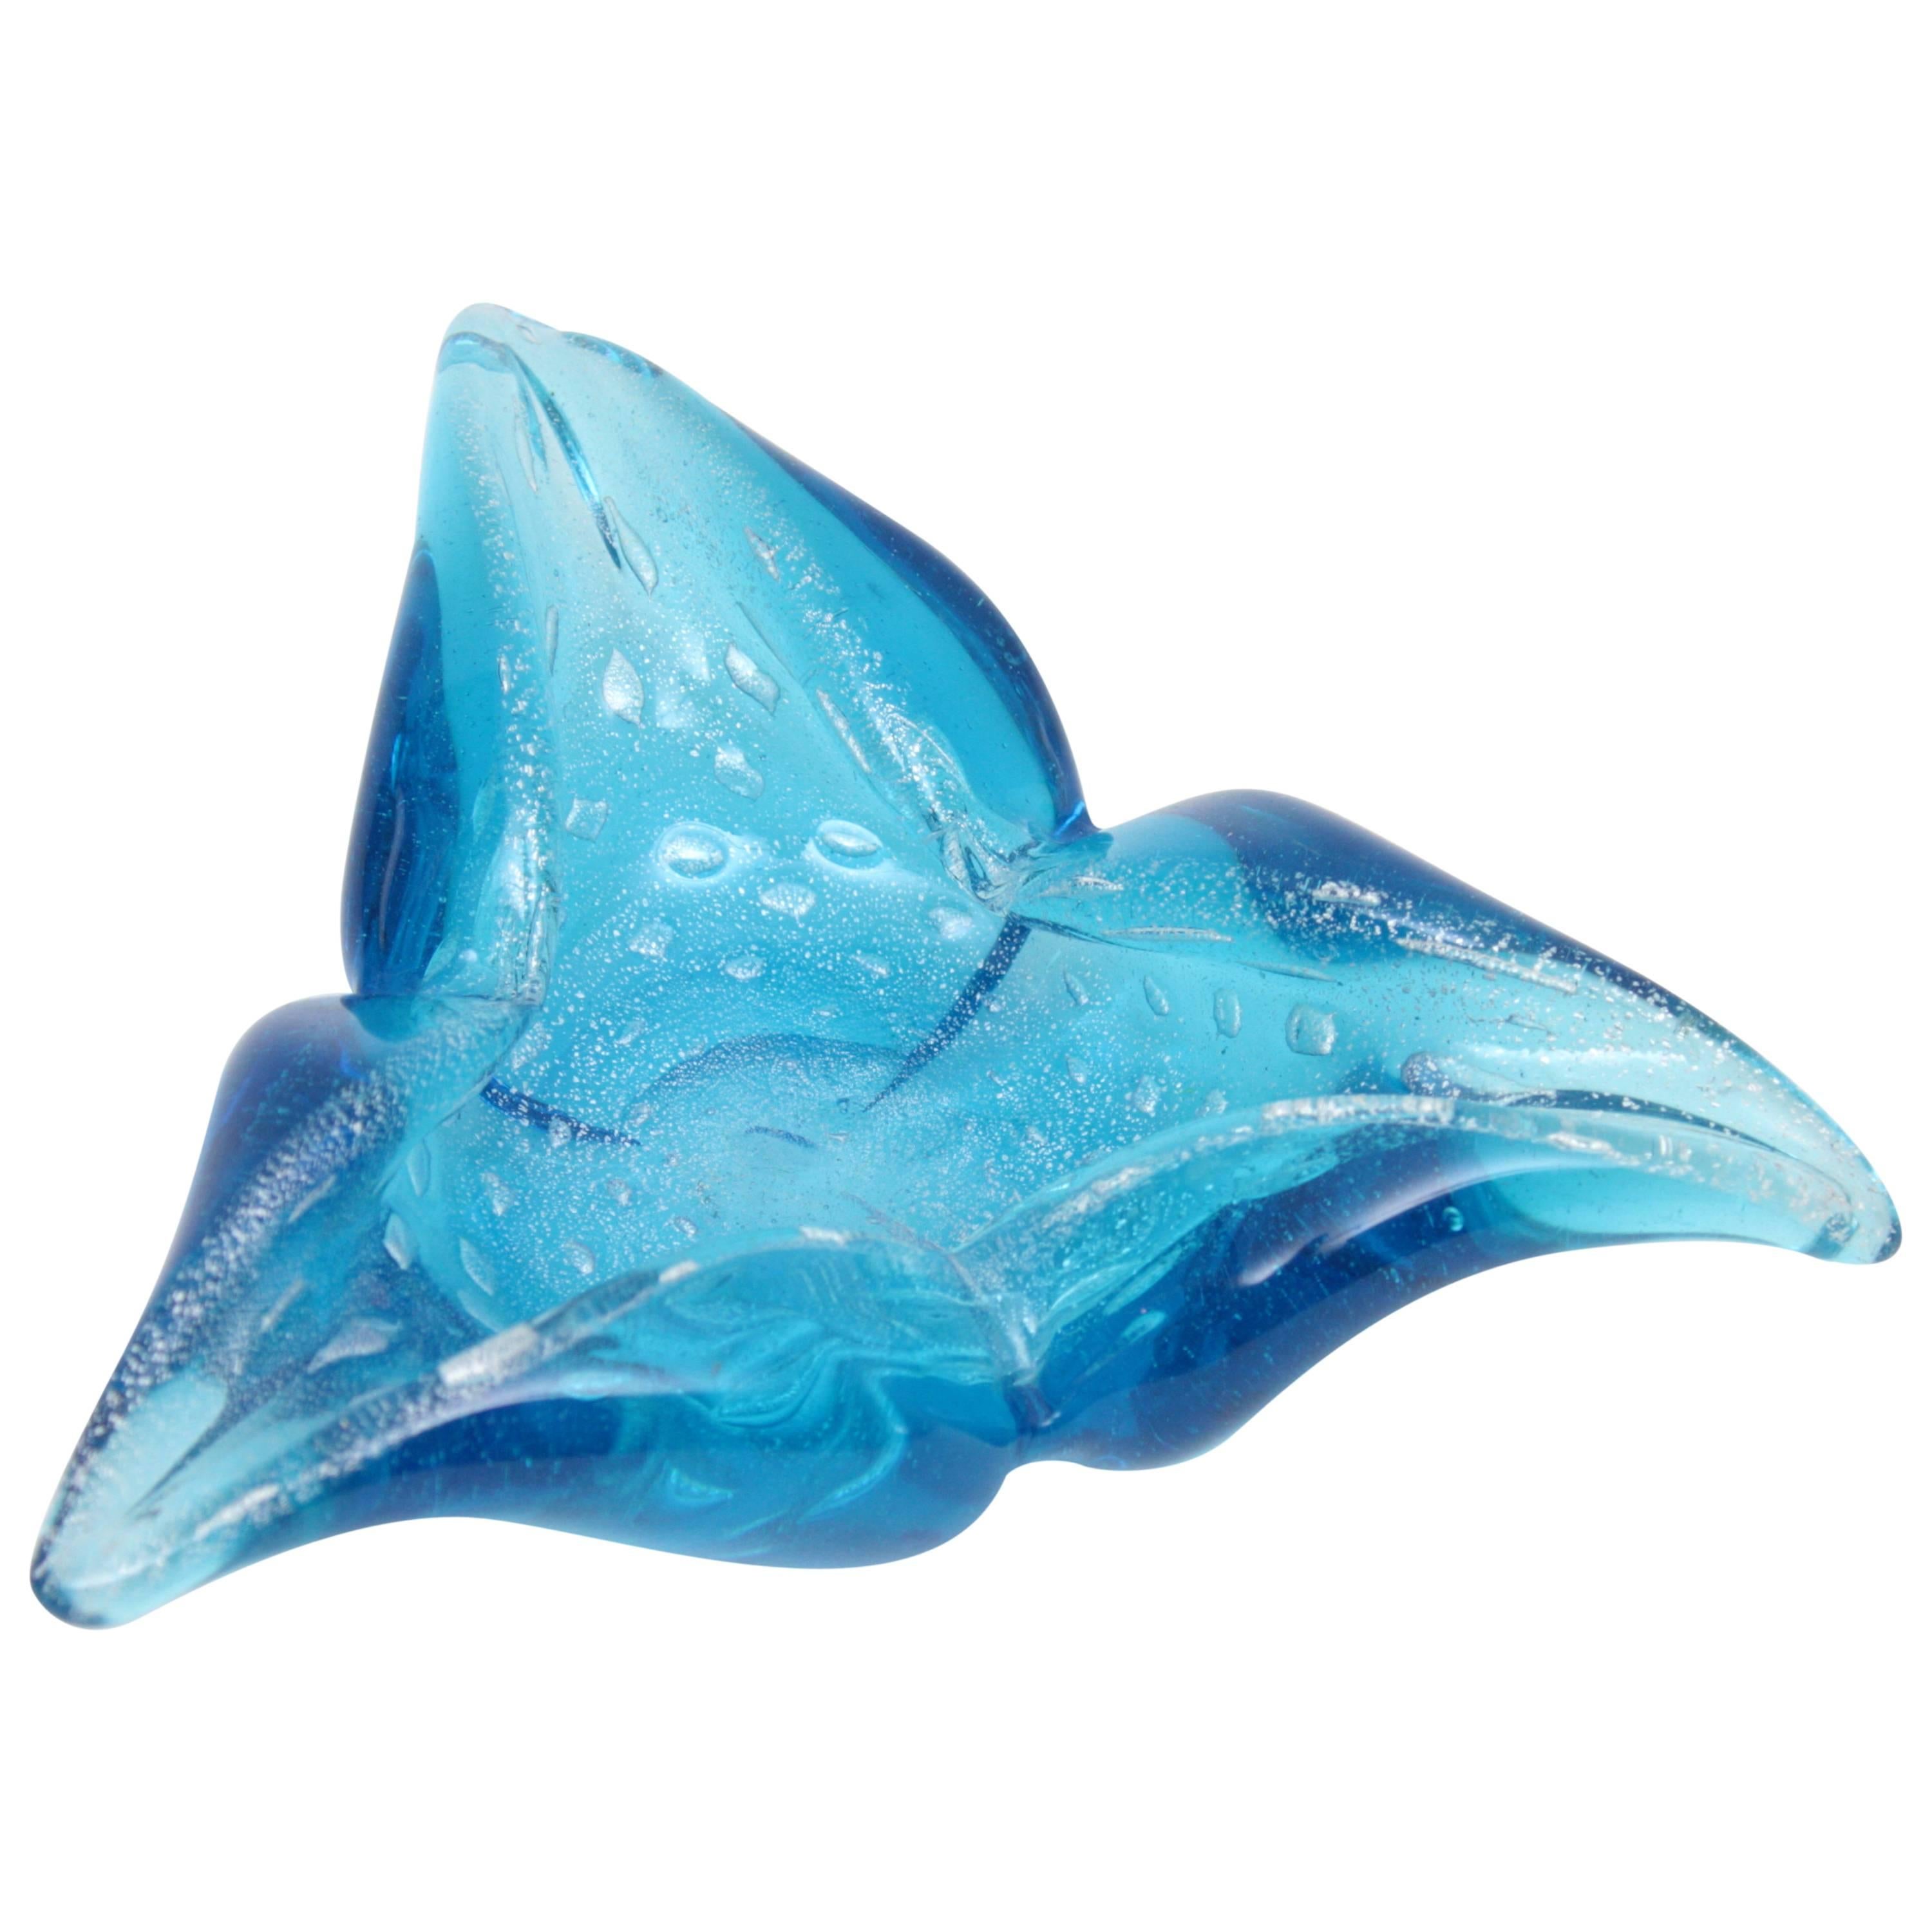 Gorgeous hand blown Murano glass bowl with controlled bubbles and aventurine technique, Italy, 1950-1960s.
Beautiful deep sky blue color, silver flecks and amazing triangular flower shape.
Excellent condition.
Perfect as a gift idea. Use it as